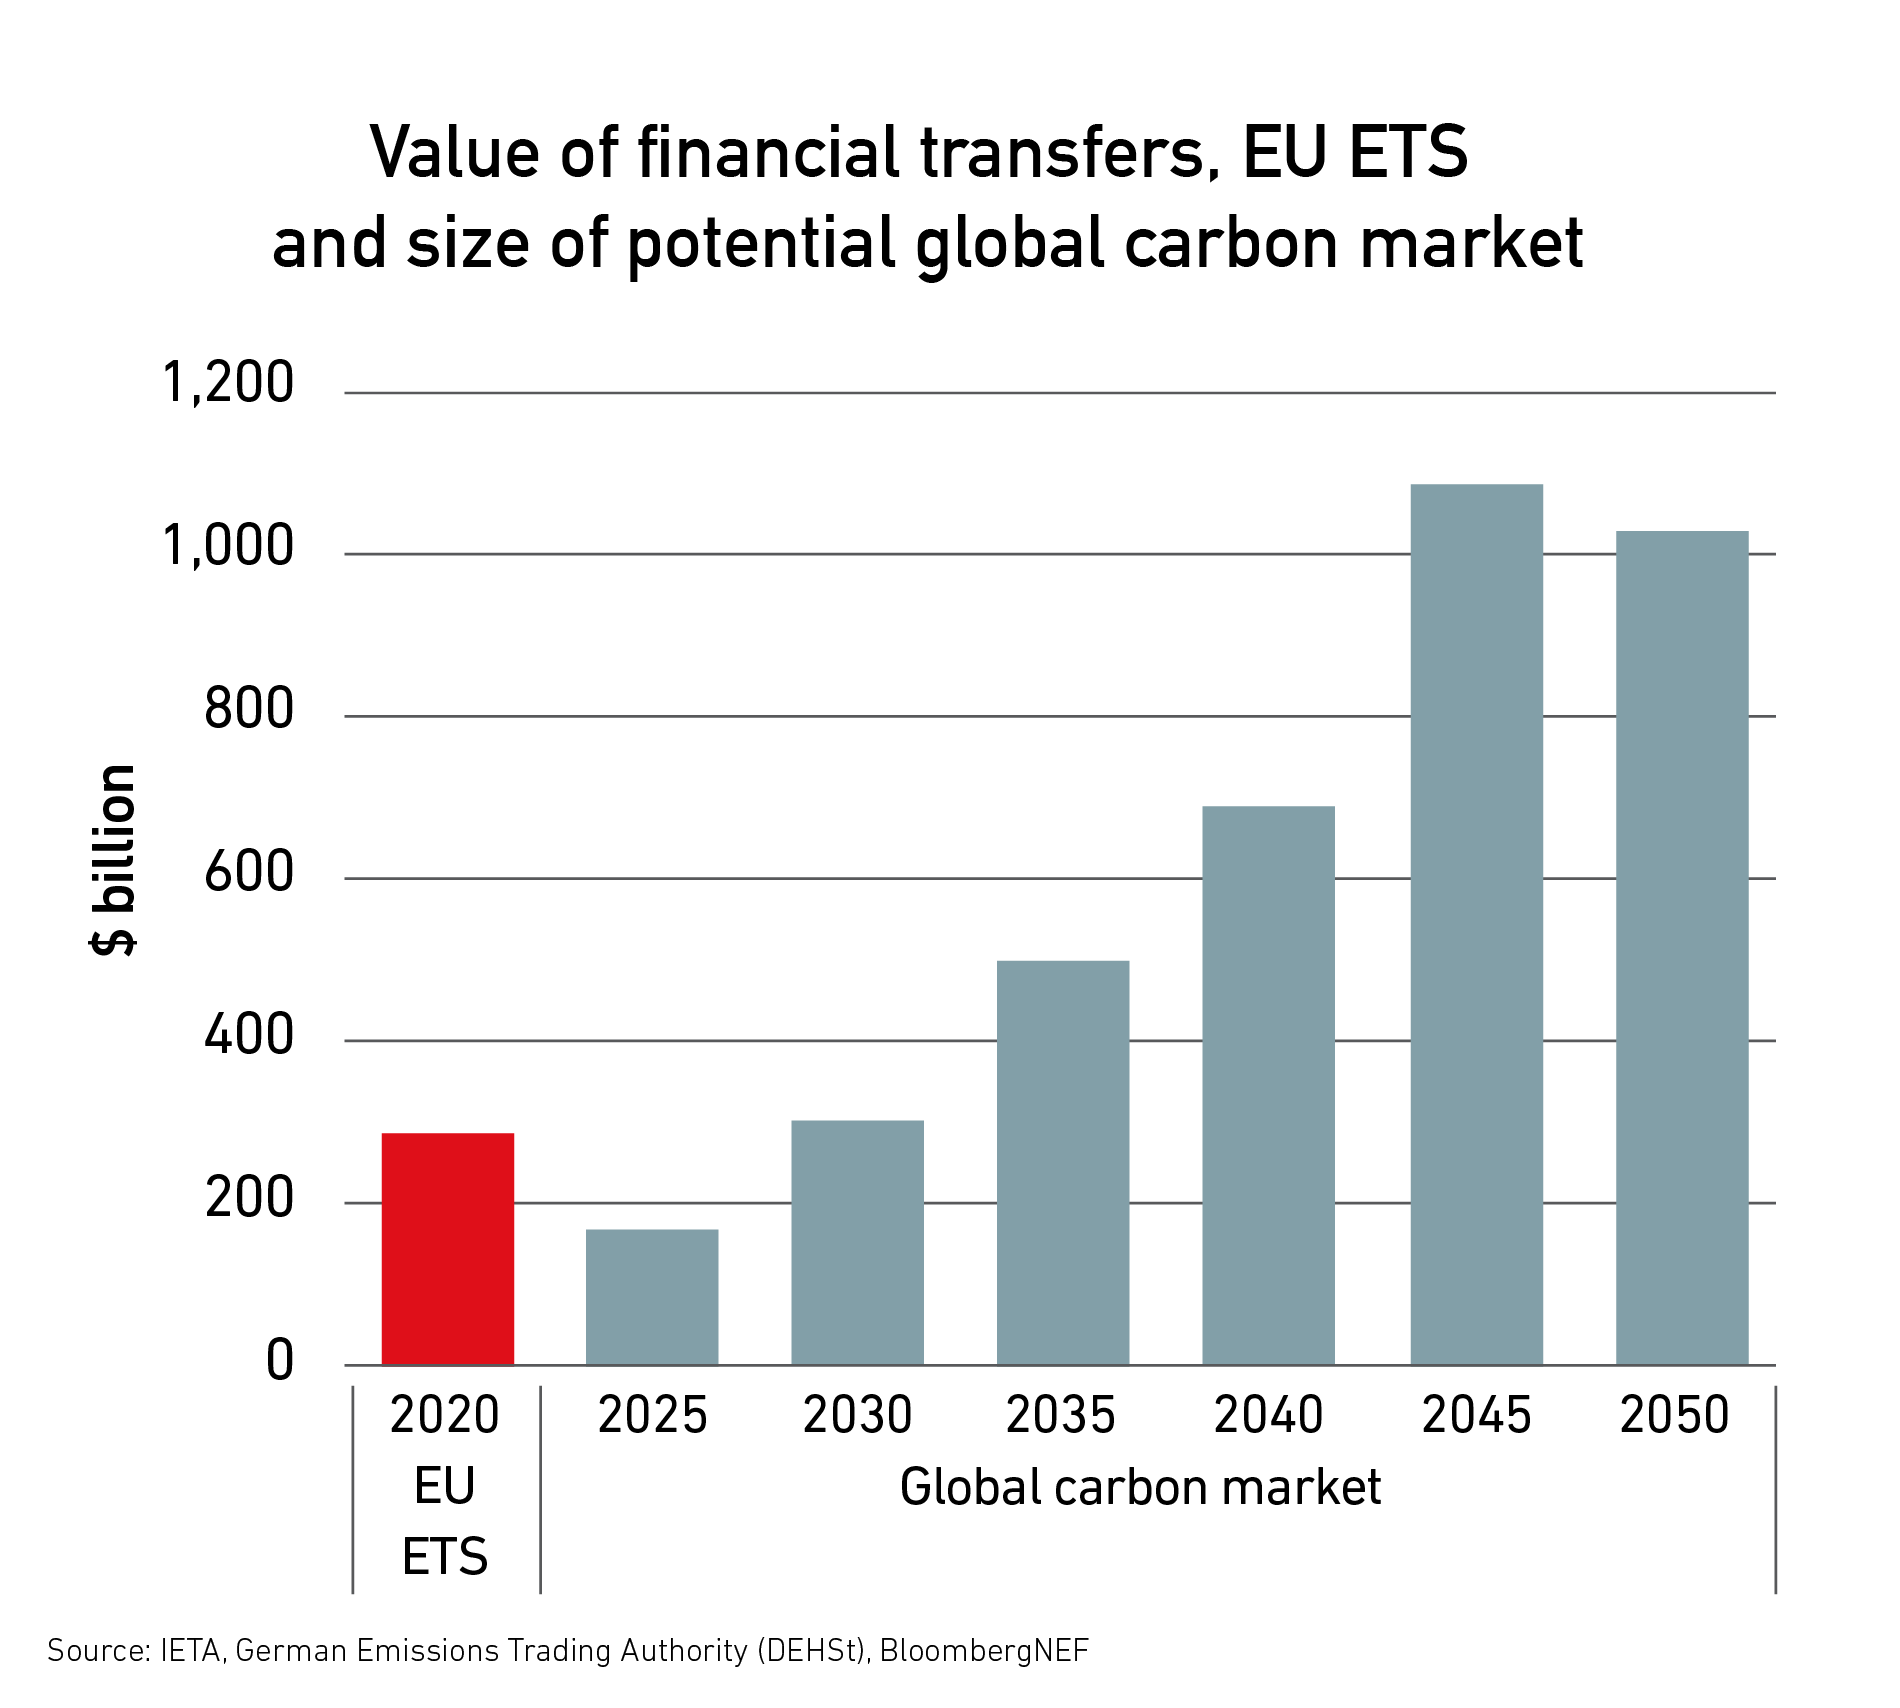 Source: IETA, German Emissions Trading Authority (DEHSt), BloombergNEF